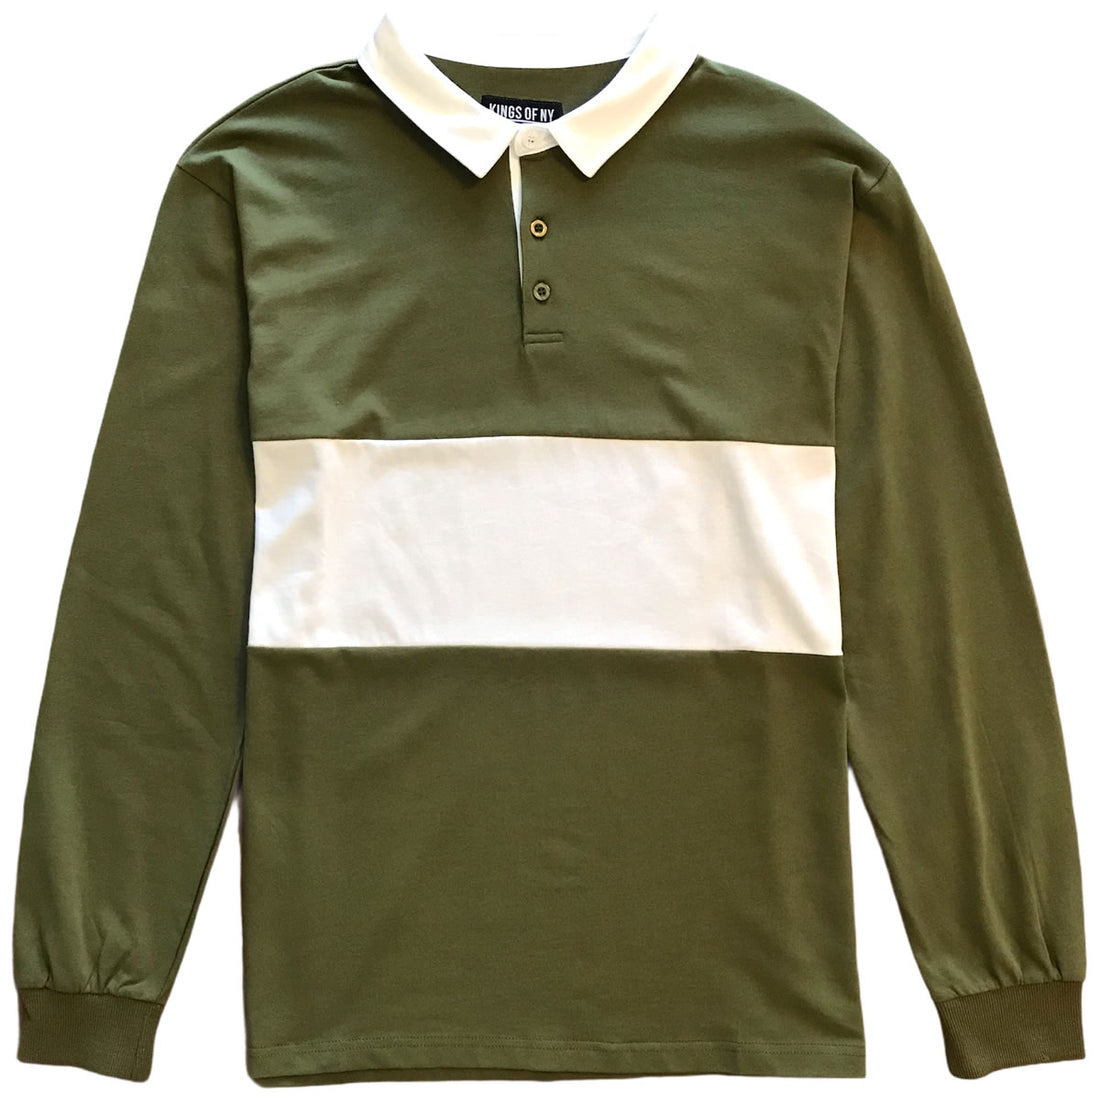 Mens Army Green and White Striped Long Sleeve Polo Rugby Shirt